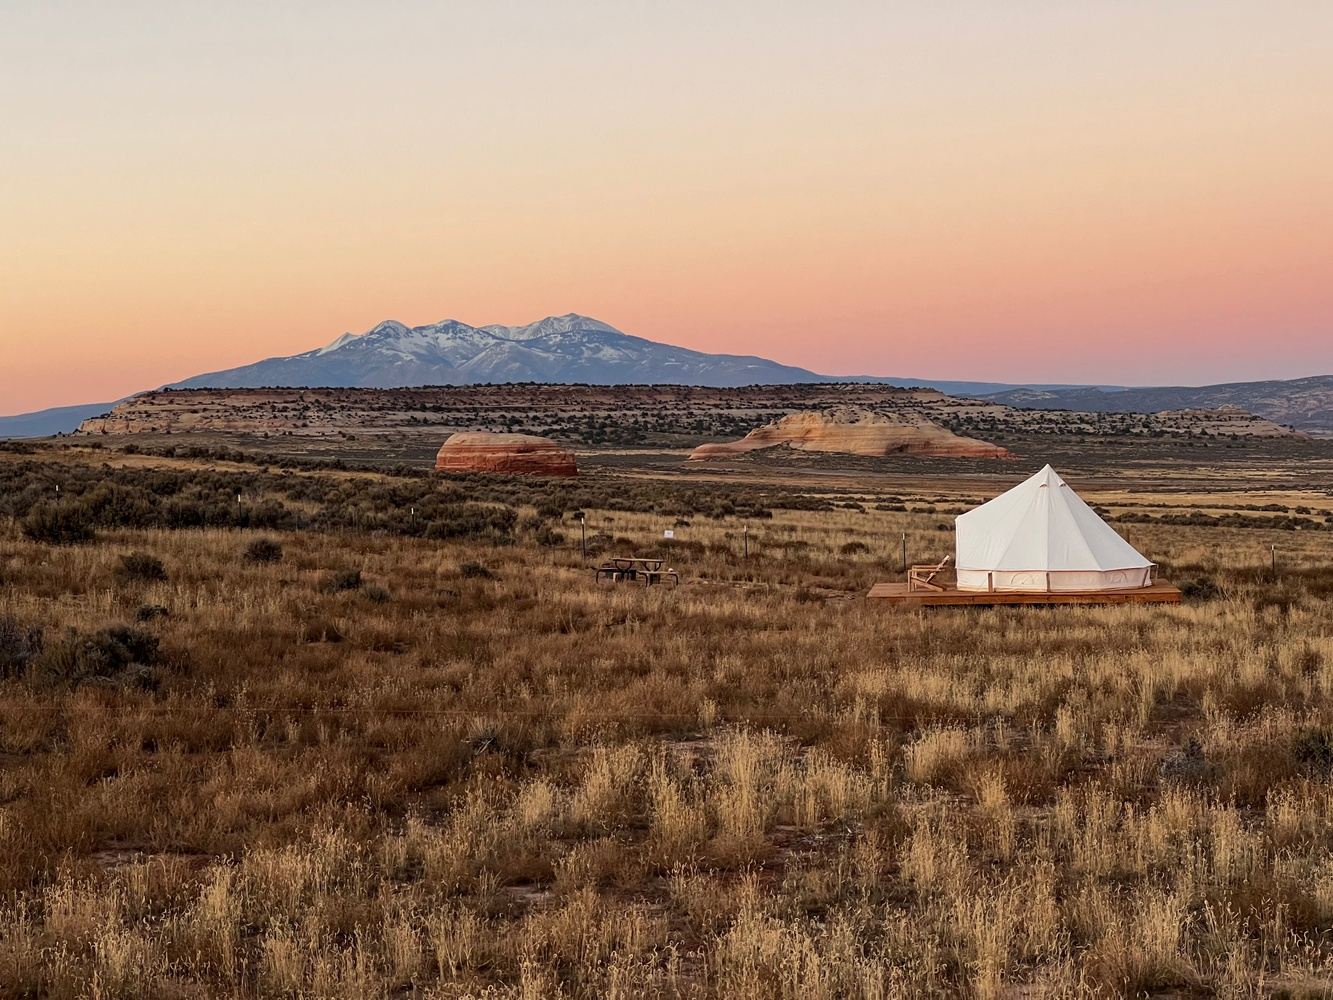 Glampingscape in Utah - A Parks and Poses Retreat